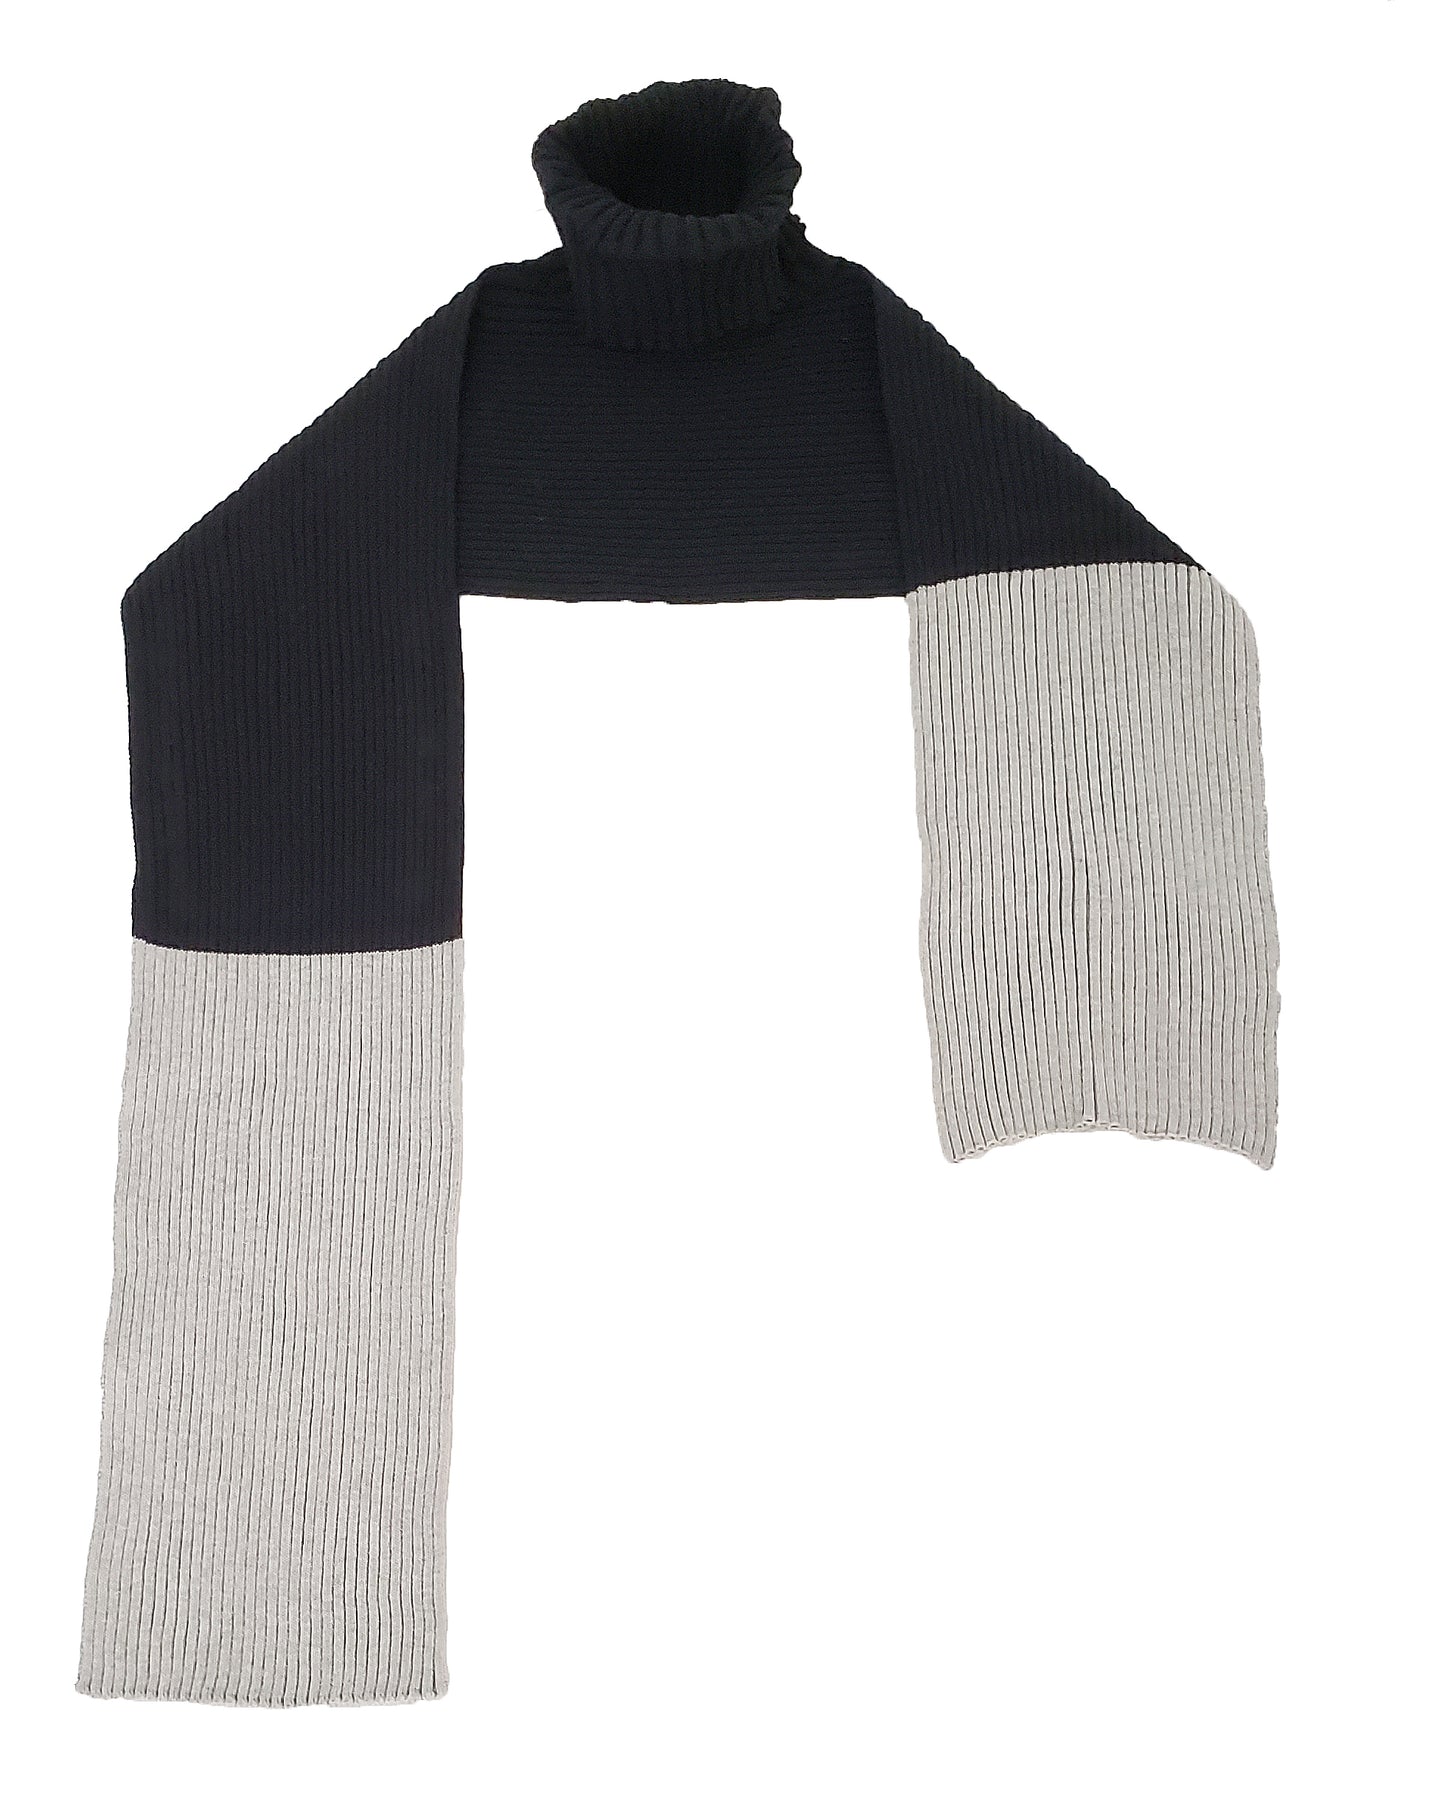 Turtle-neck inset scarf